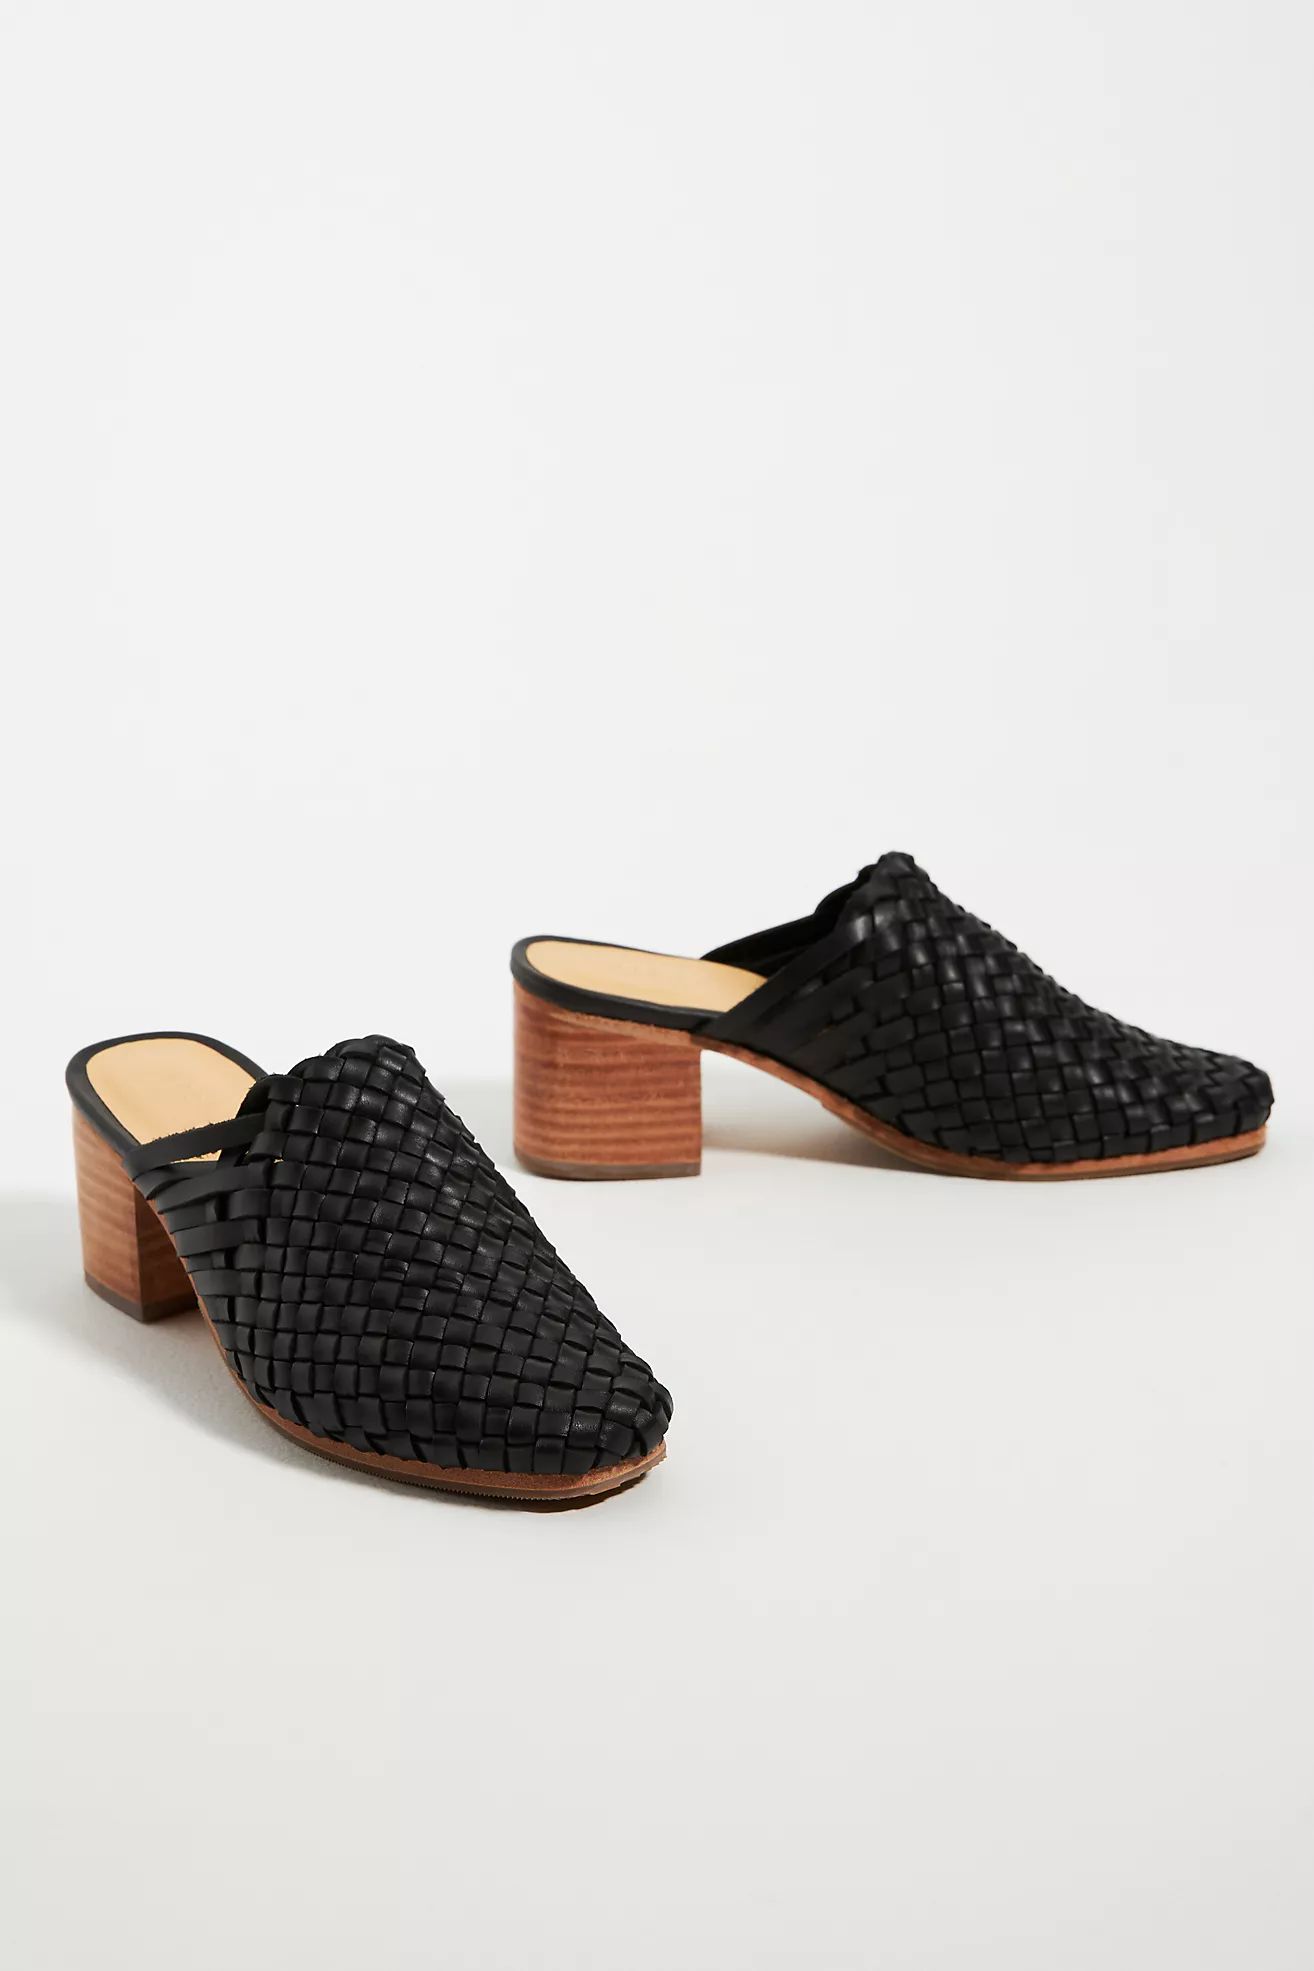 Nisolo All-Day Woven Heeled Mules | Anthropologie (US)